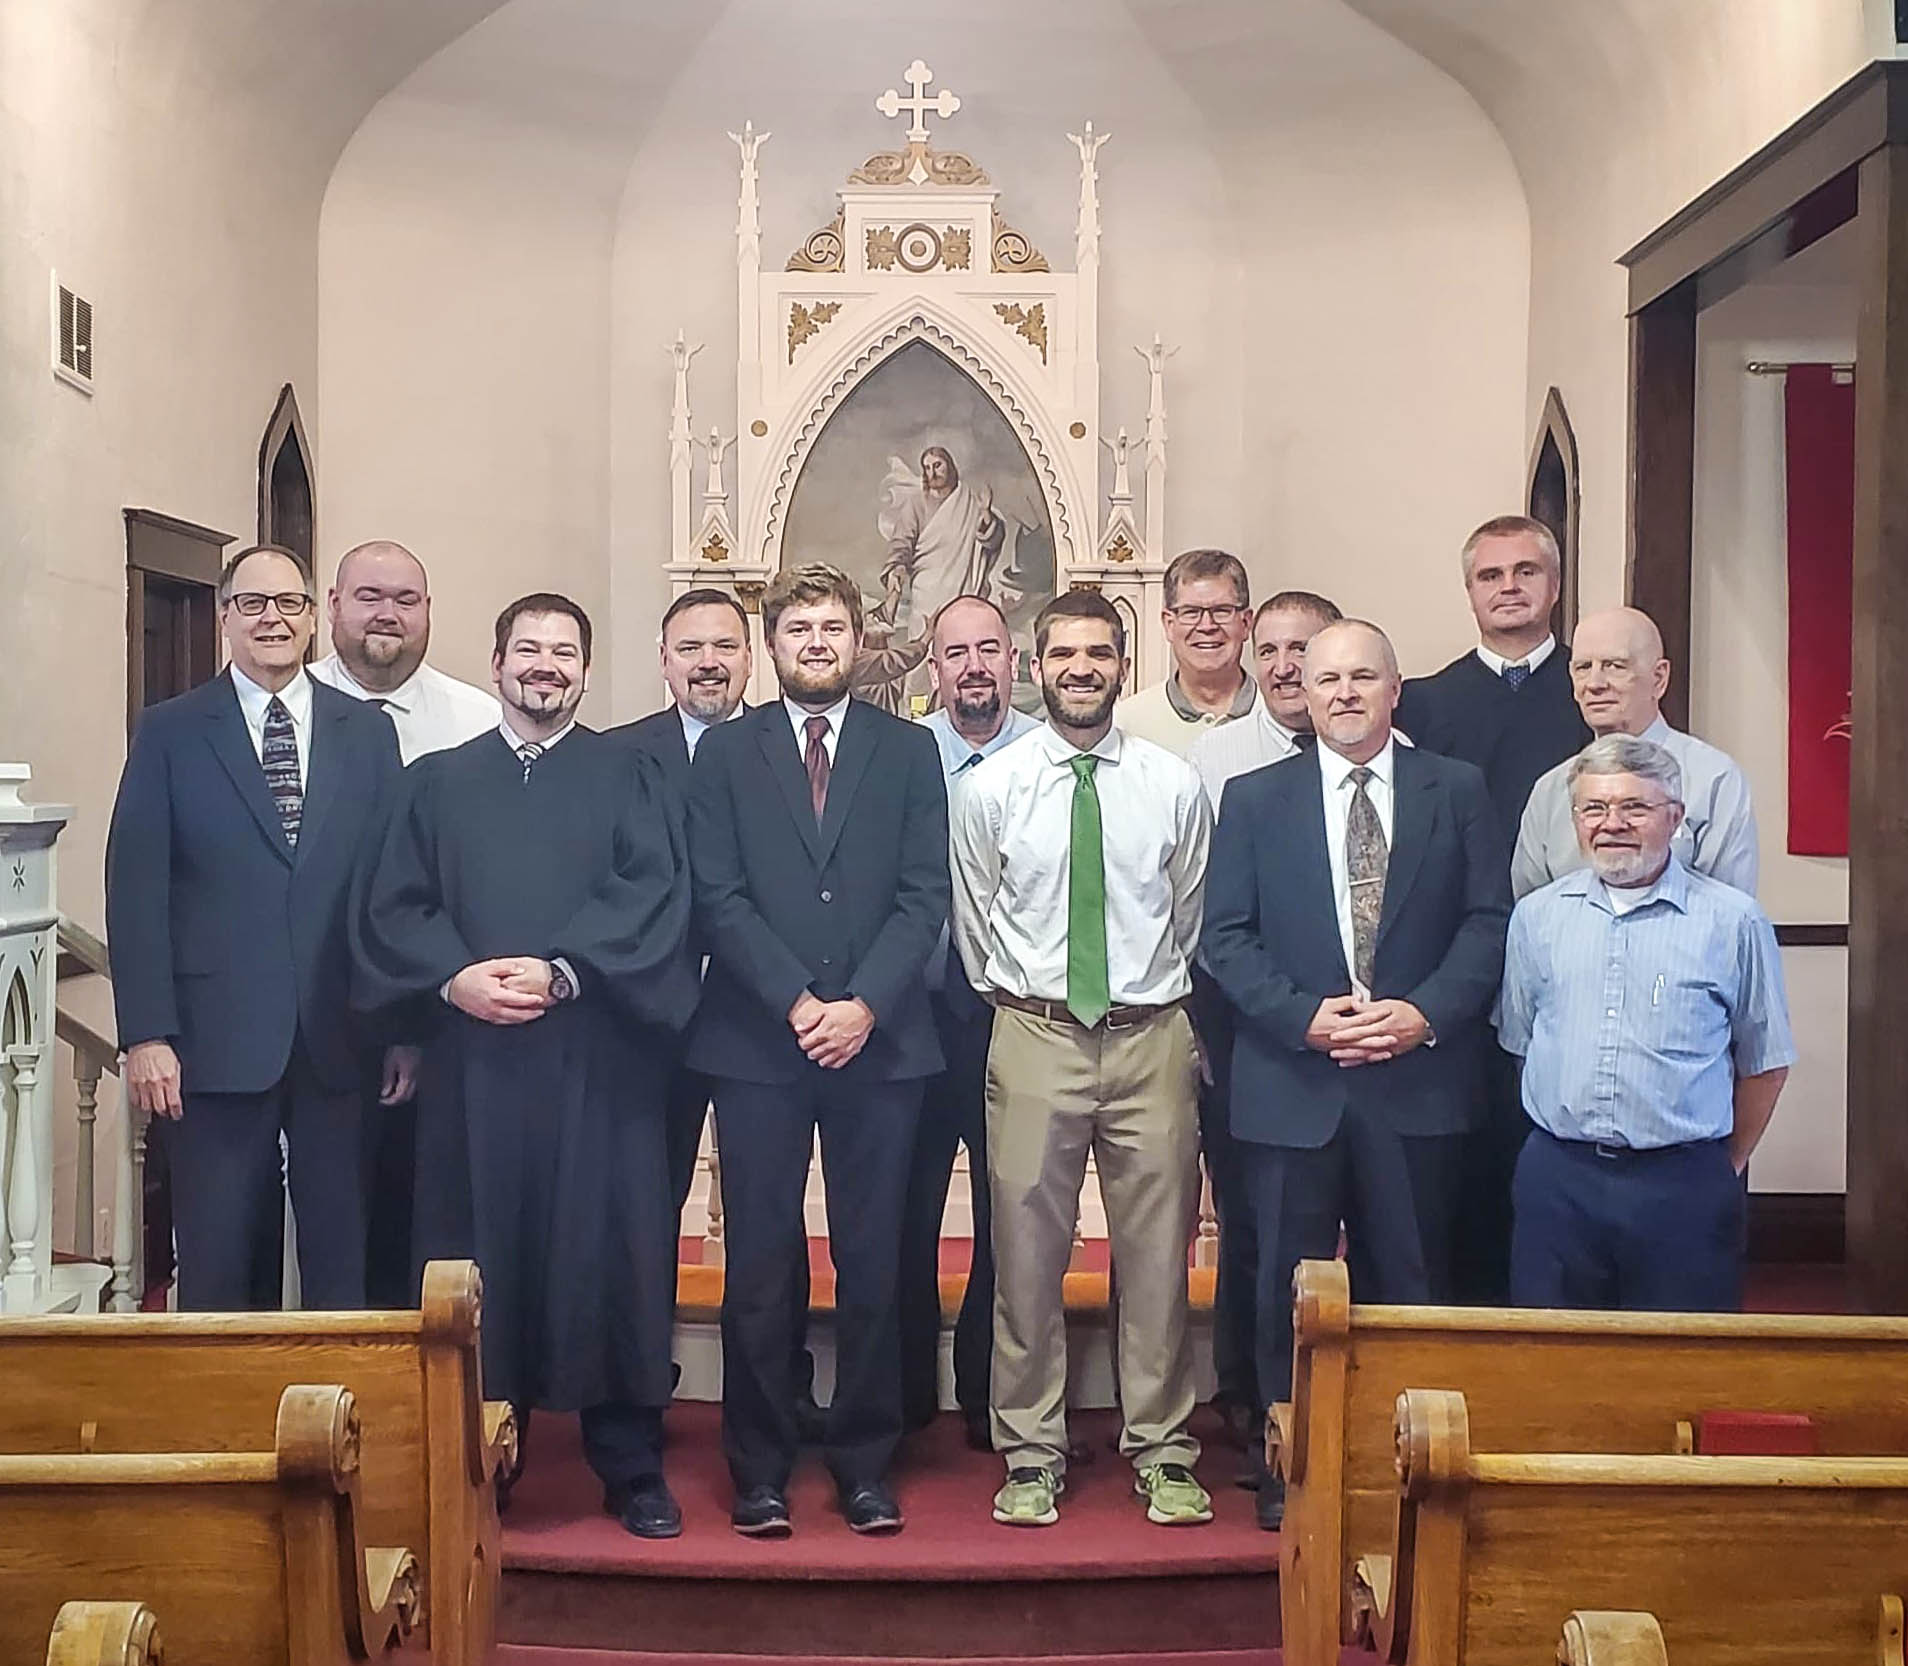 Attendees of the West Central Pastoral Conference, September 13-15, Prince of Peace Lutheran Church, Hecla, South Dakota.